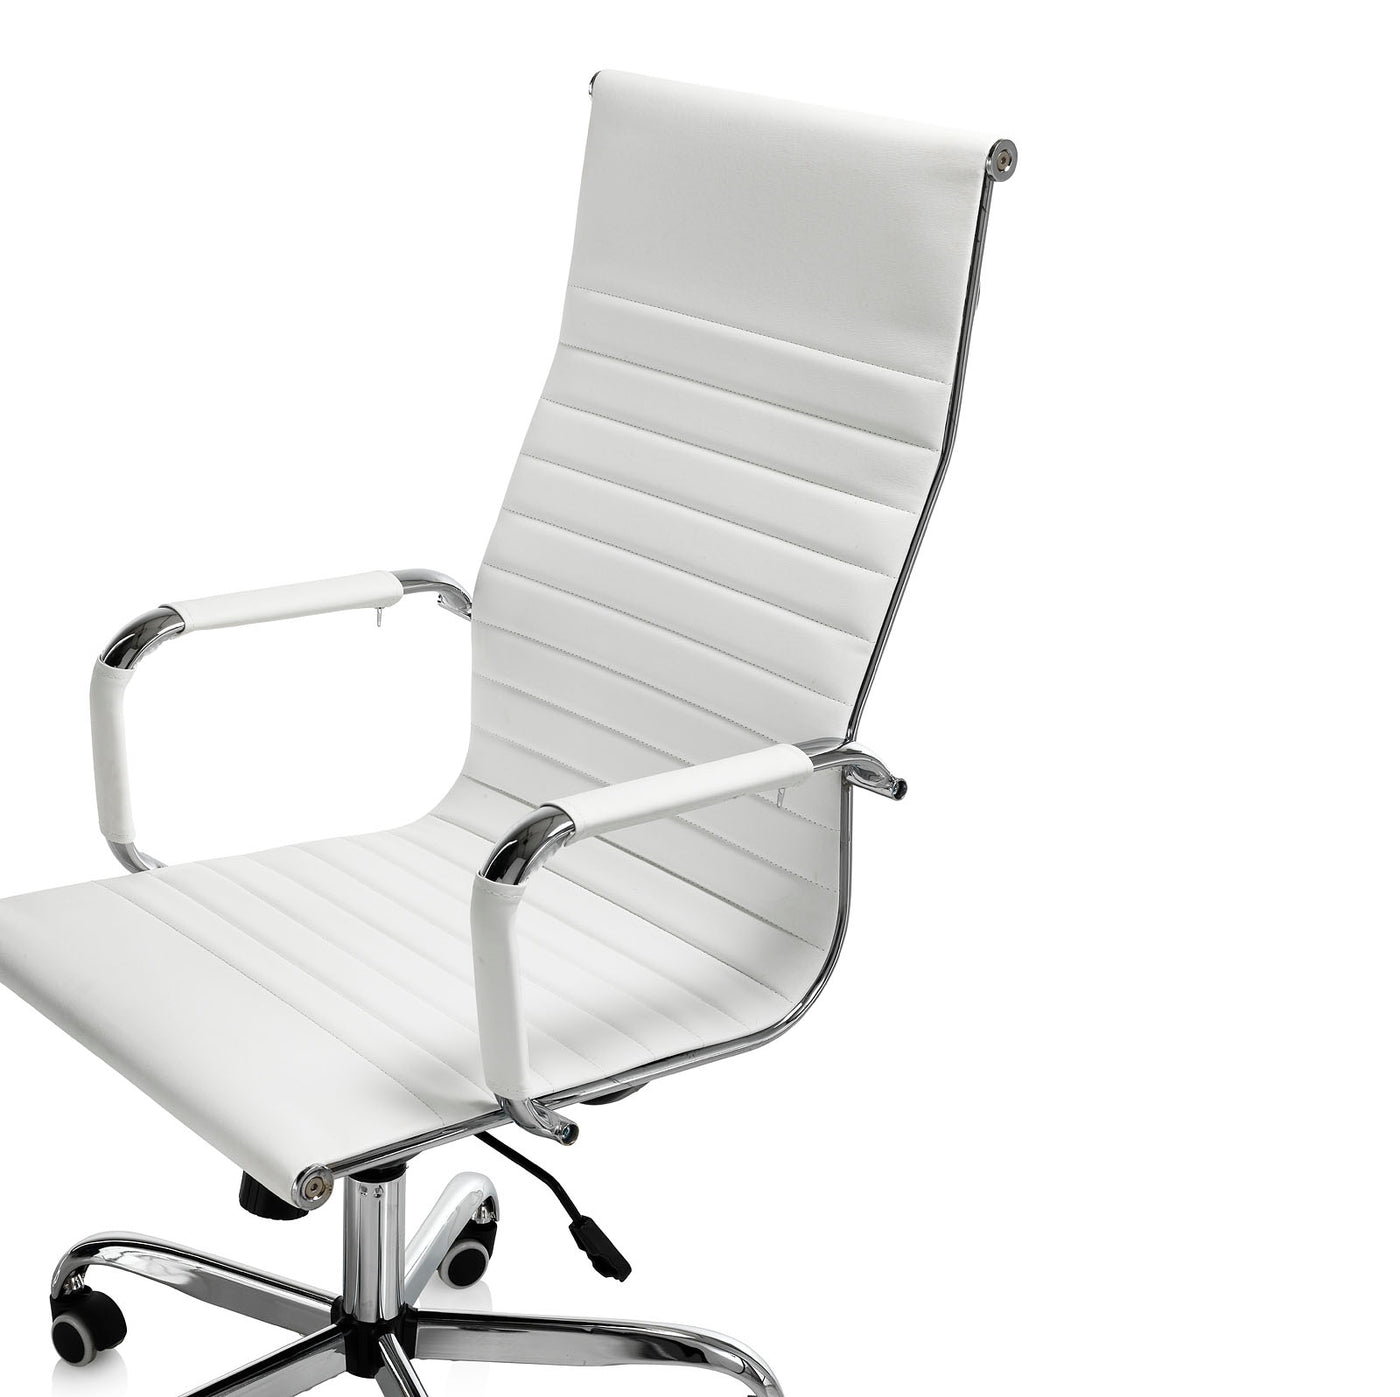 LAYA white executive office chair